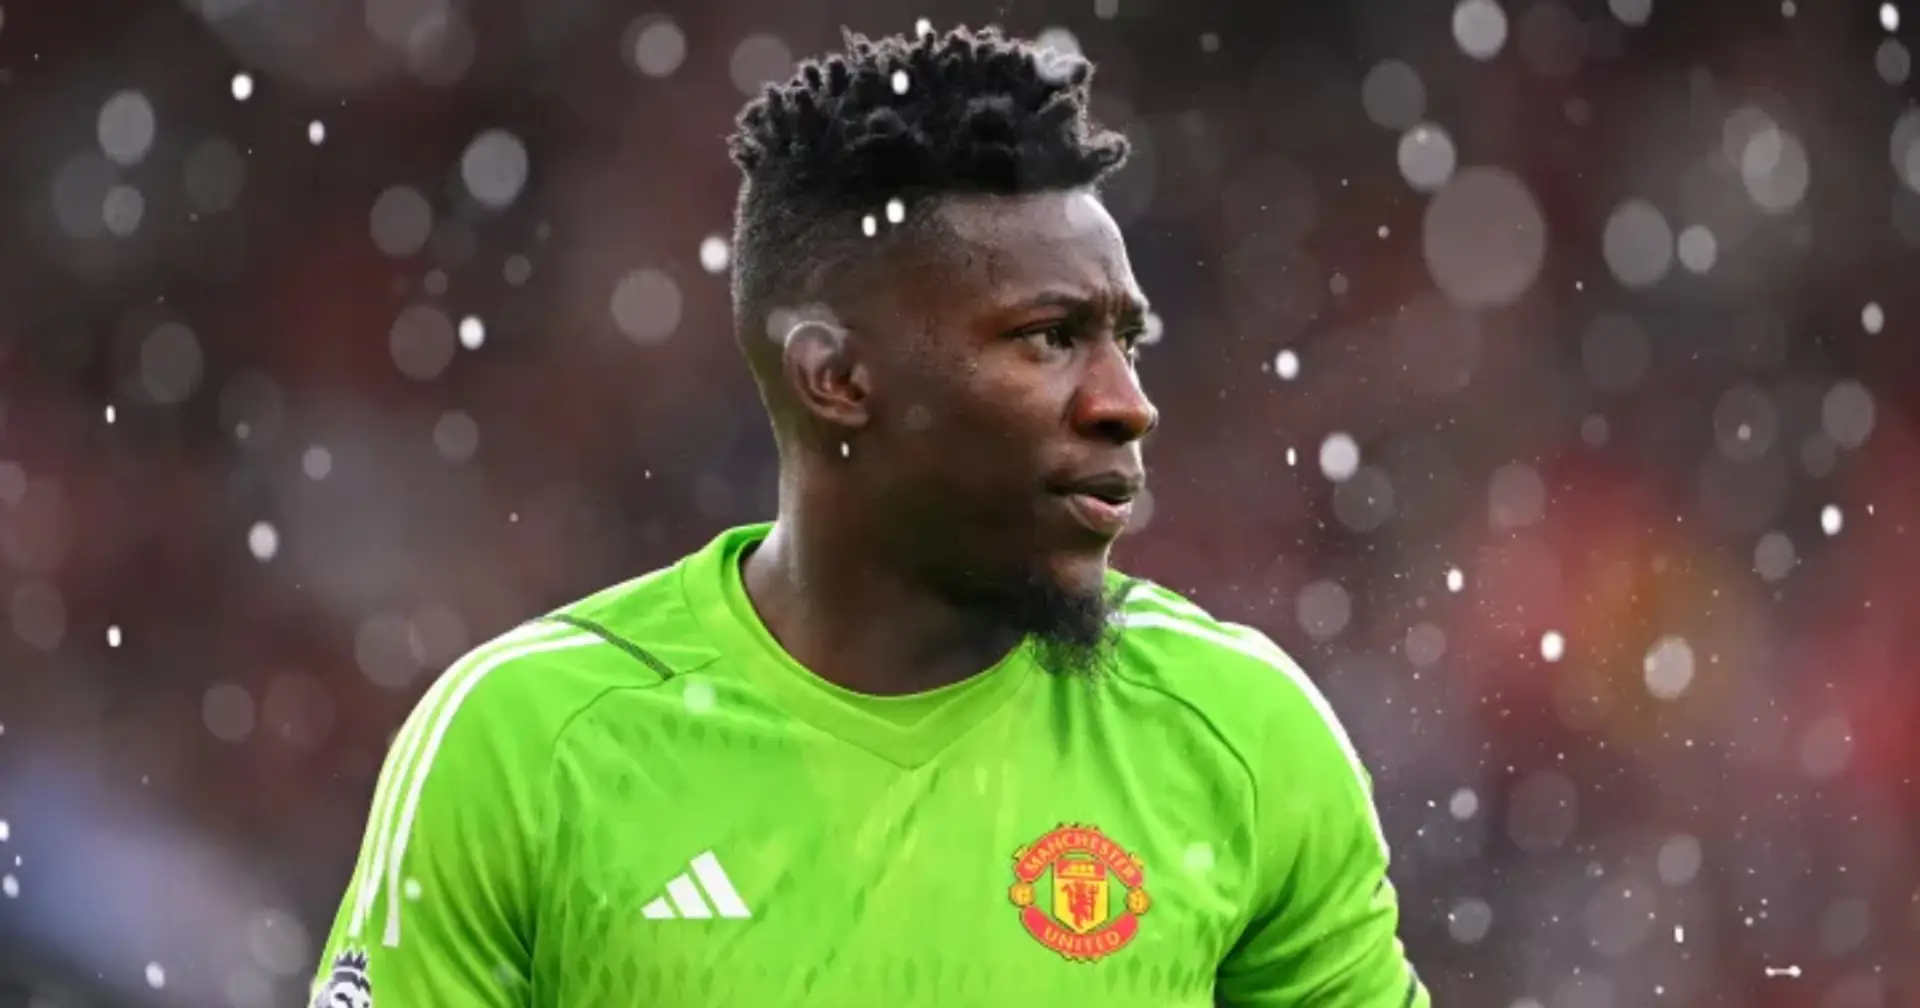 'Disappointing to see': Man United fans react to Andre Onana's start to life at Old Trafford